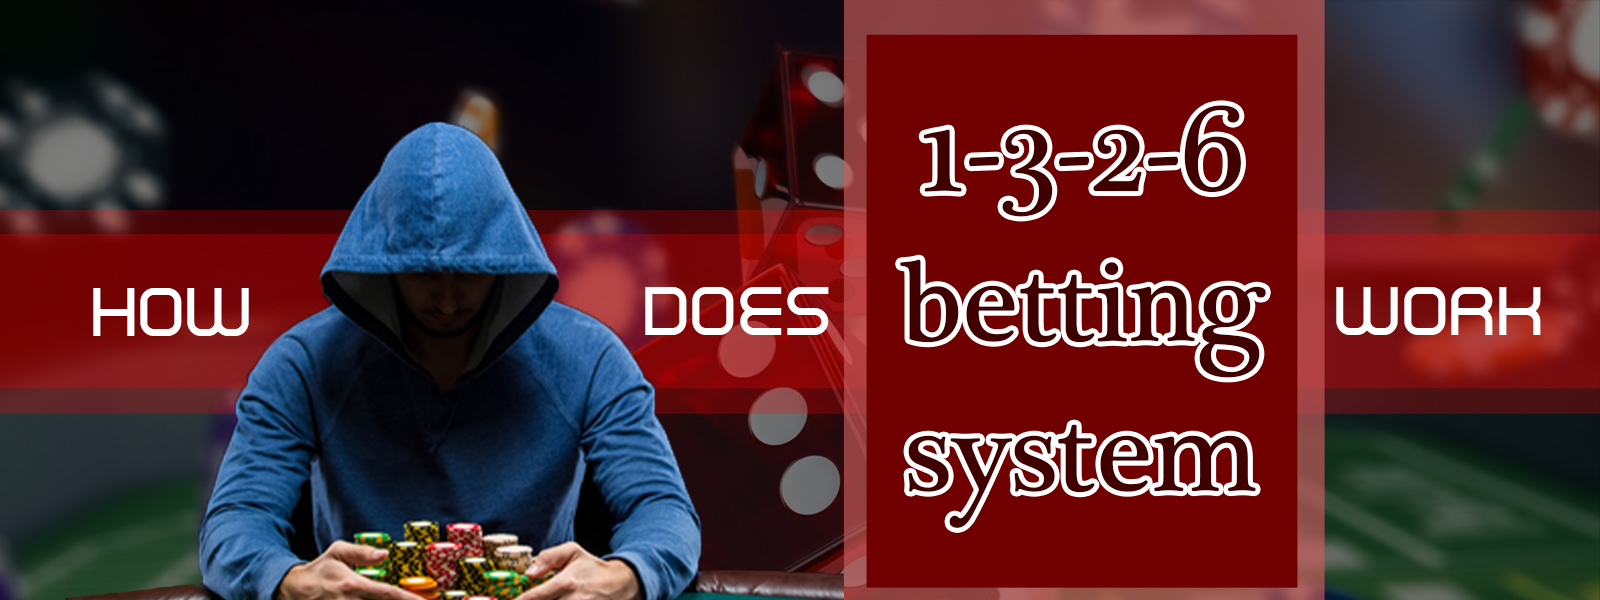 How Does The 1-3-2-6 Betting System Work?